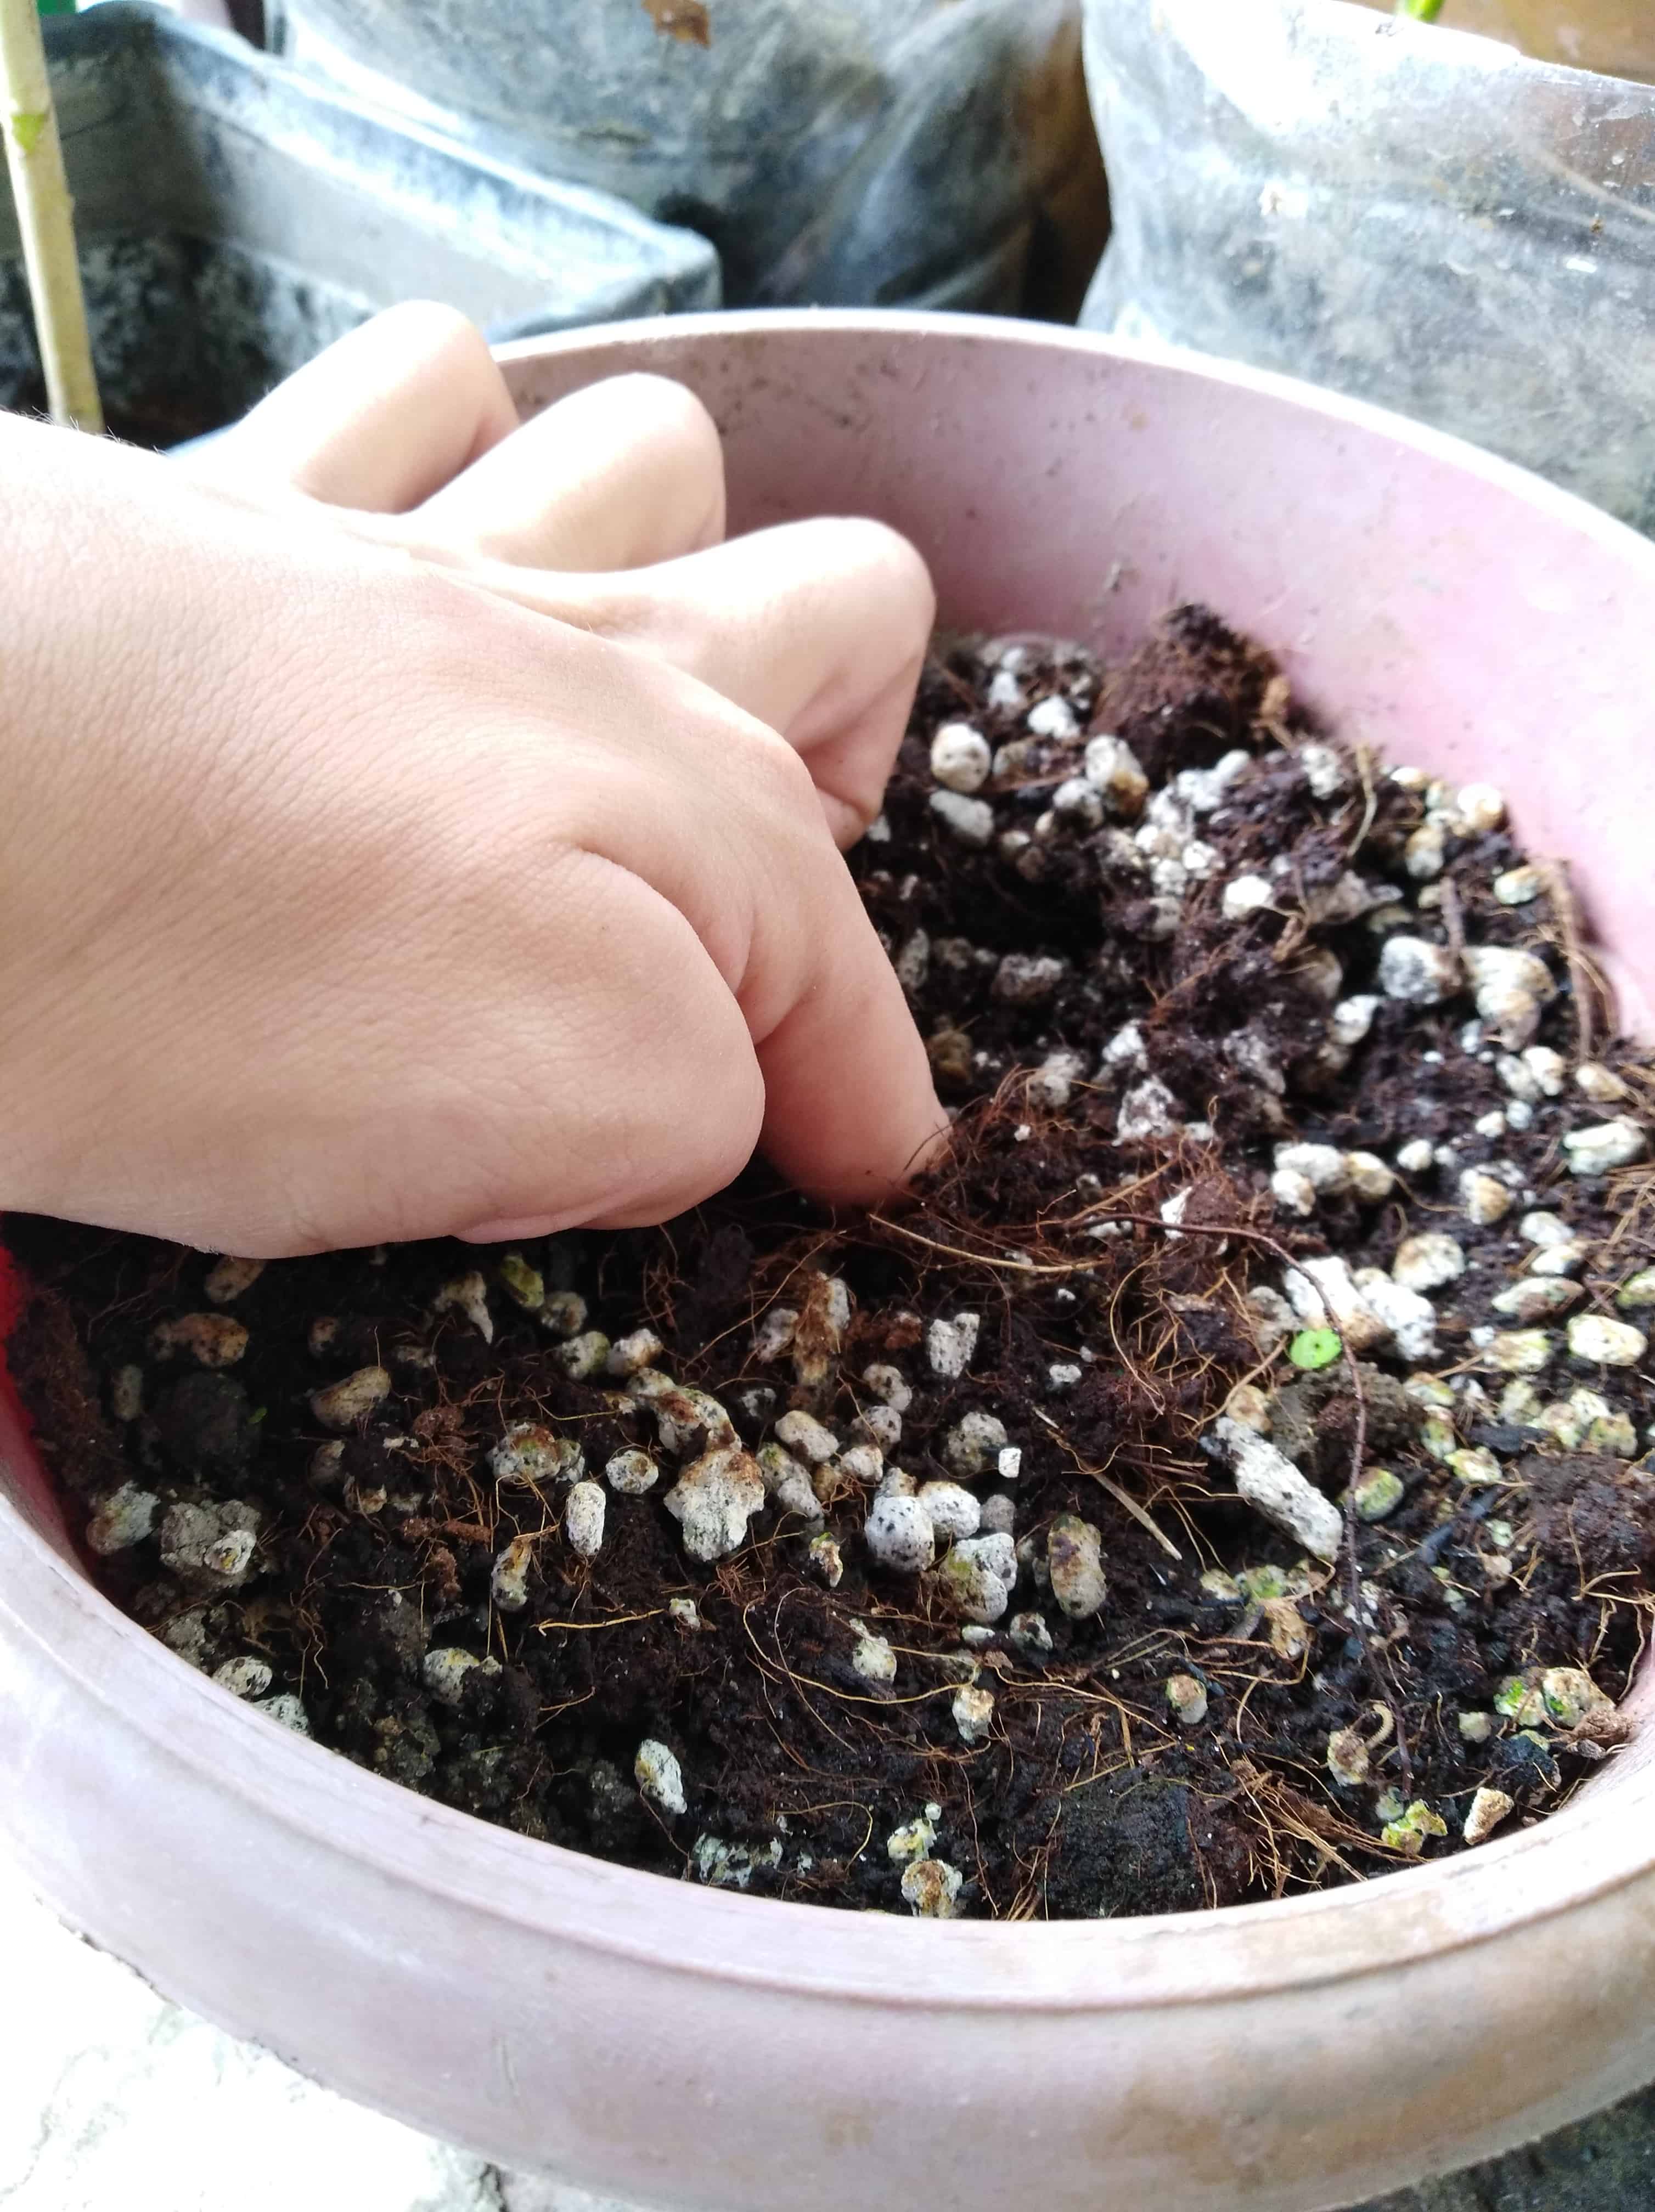 Poking a hole in fresh soil for propagation